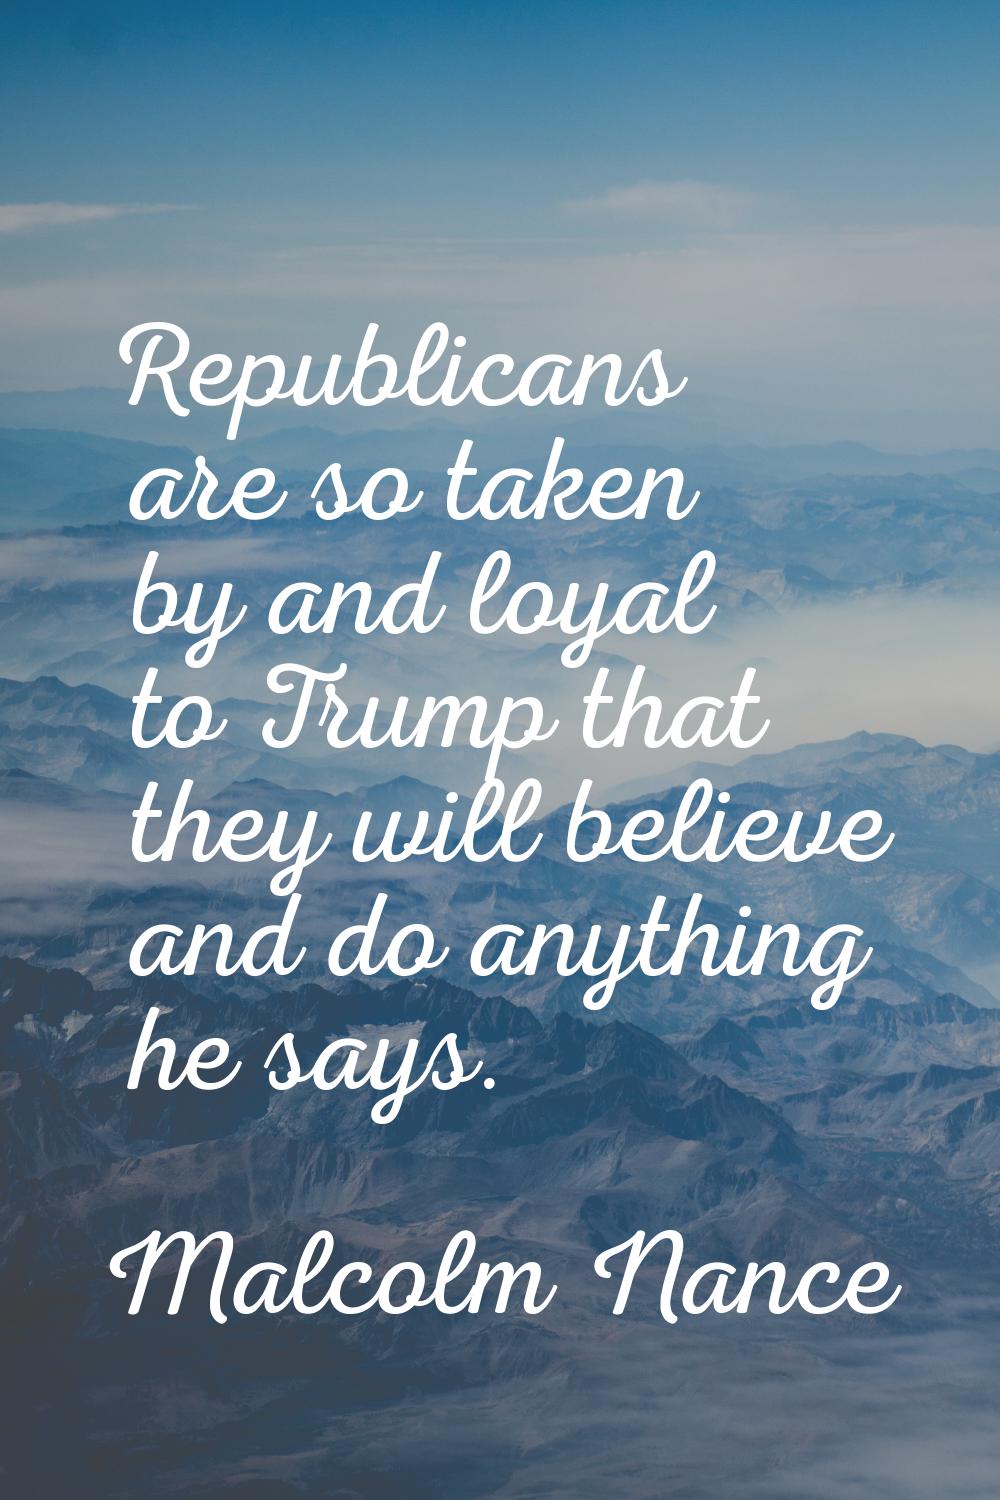 Republicans are so taken by and loyal to Trump that they will believe and do anything he says.